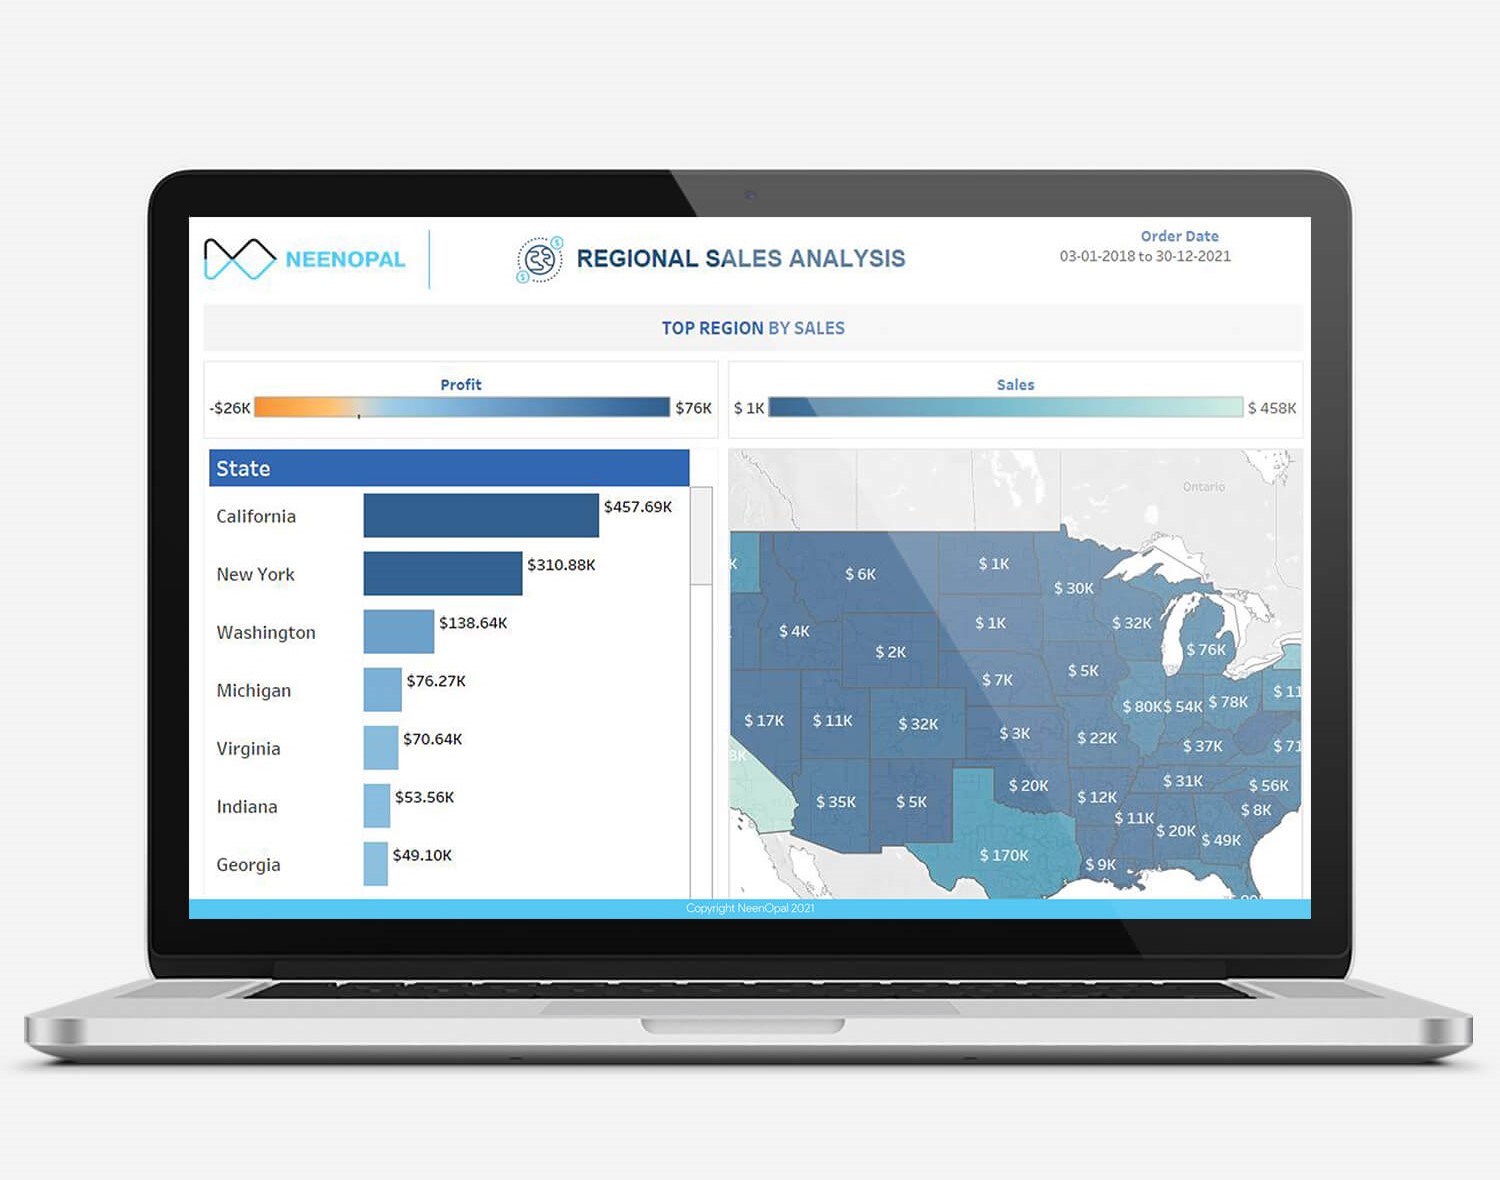 Product Performance: Regional Sales Analysis Report